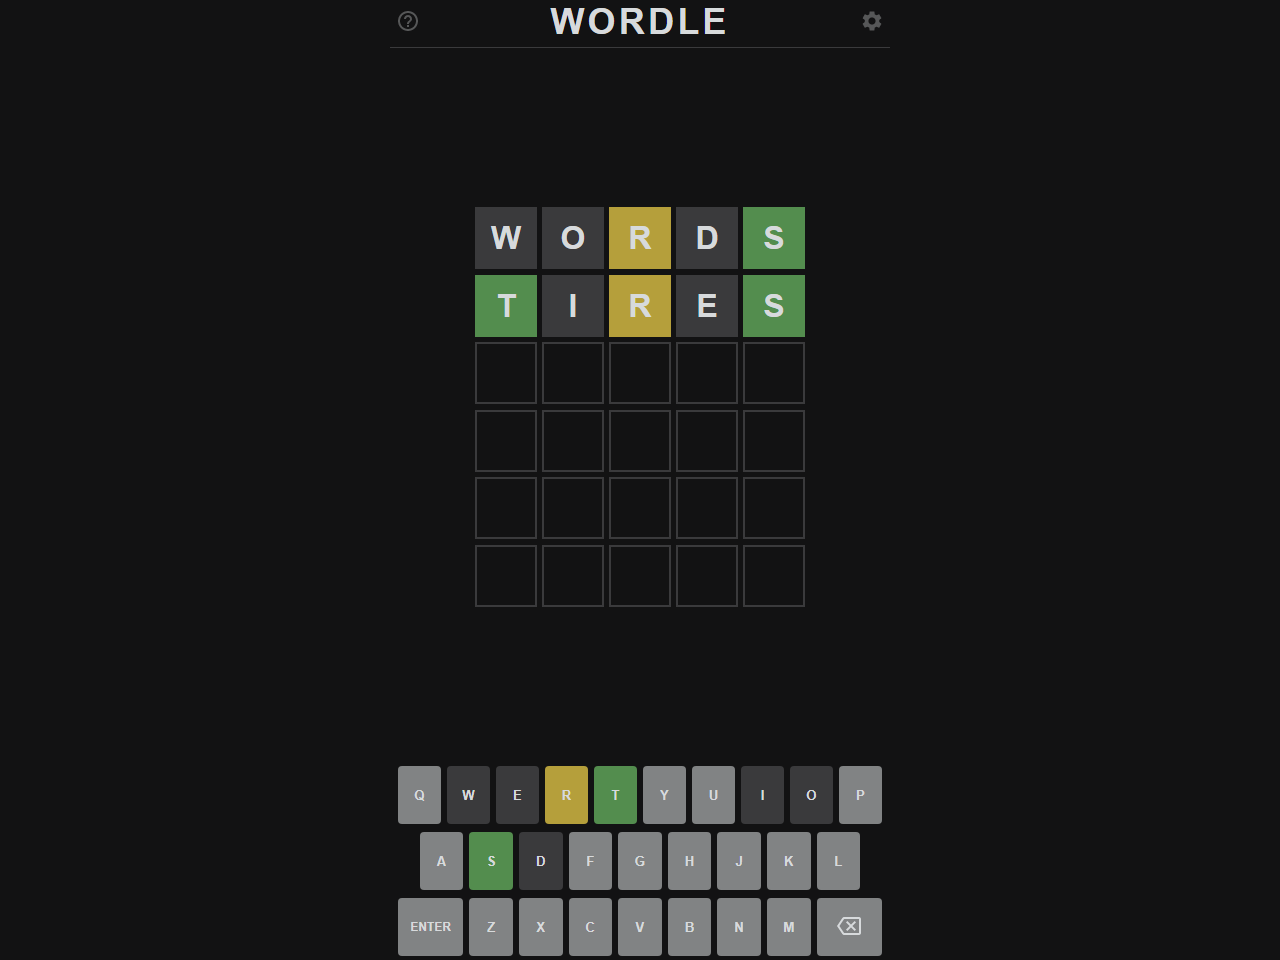 An image of the word puzzle game "Wordle," which went viral in late 2021 and early 2022.